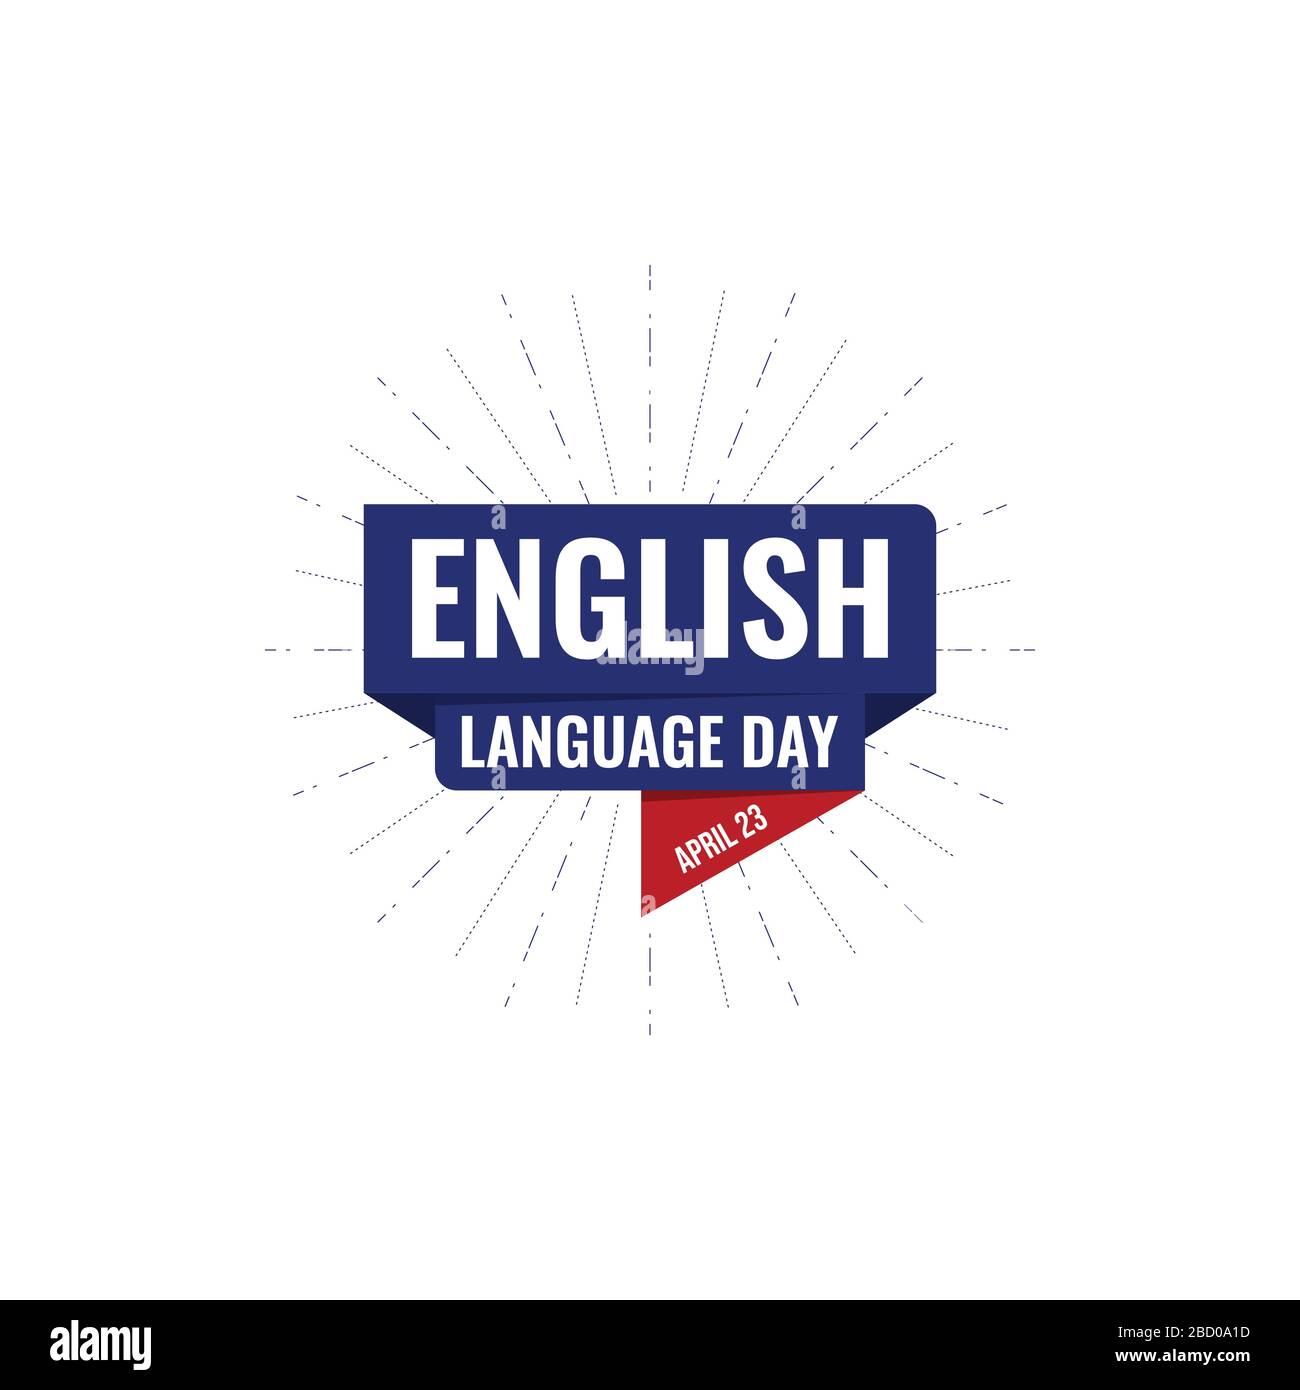 English Language Day Banner Vector Image Text With National Flag Of